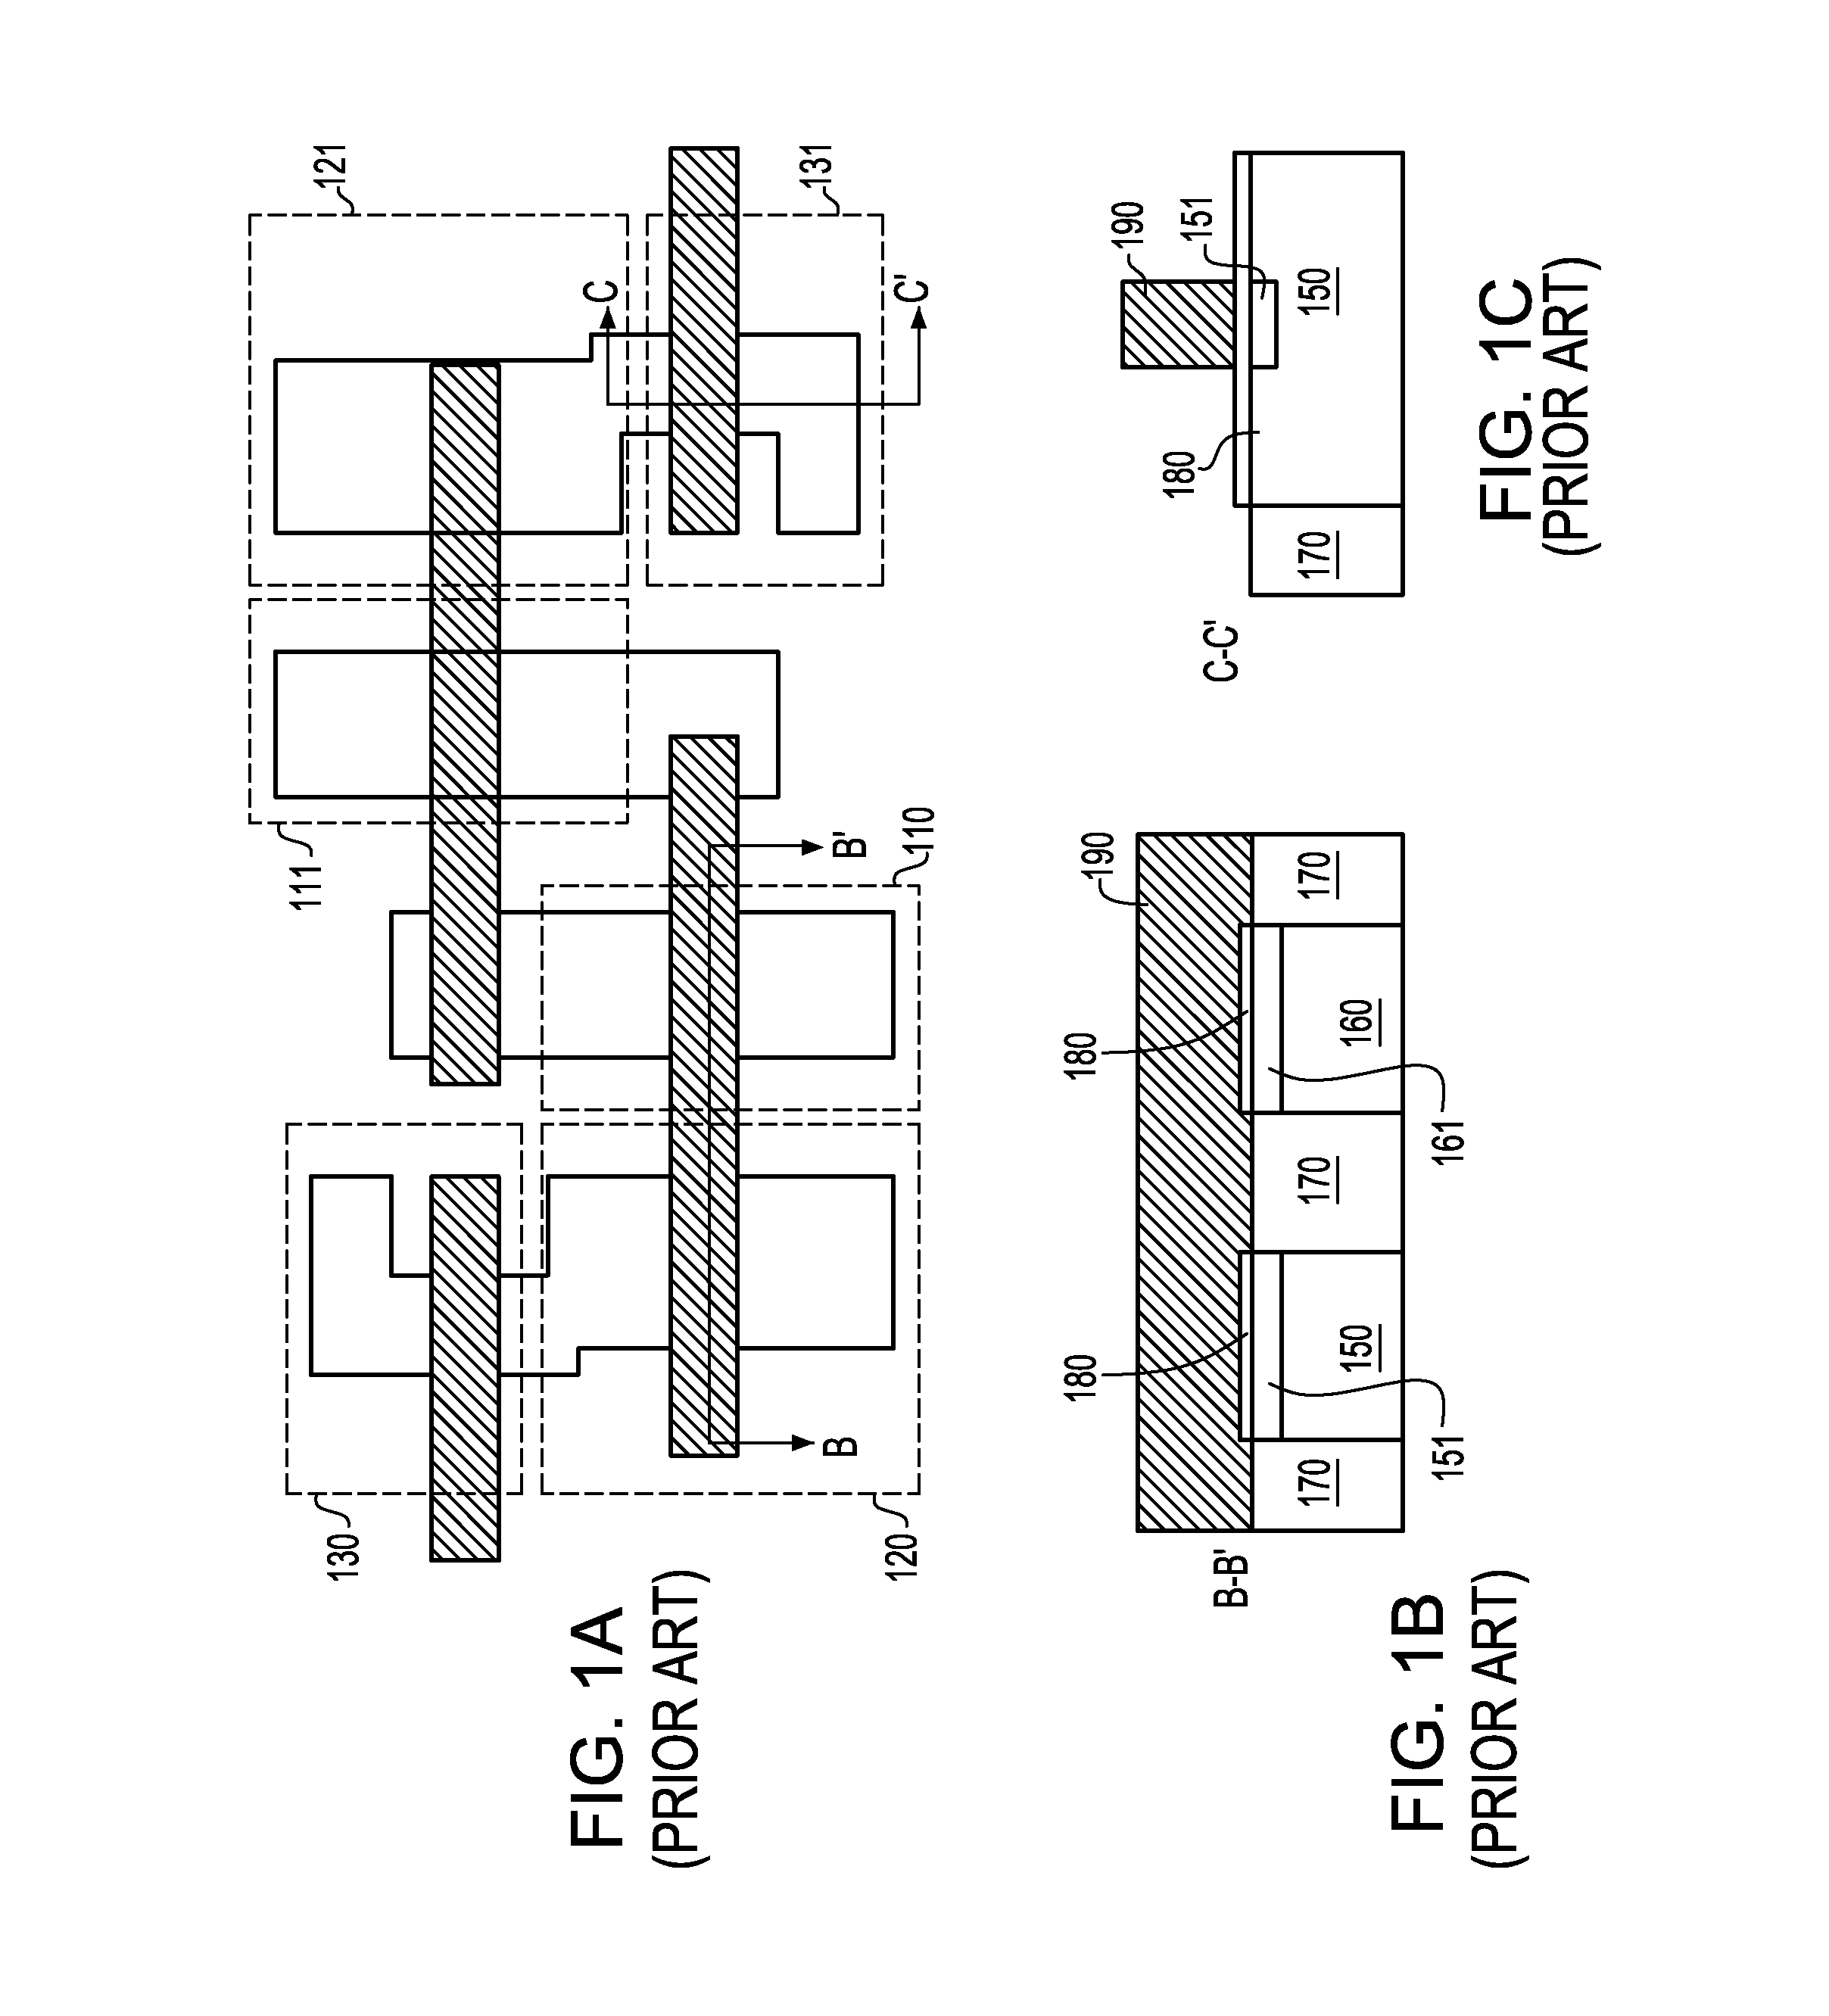 Structure and method for dual surface orientations for CMOS transistors